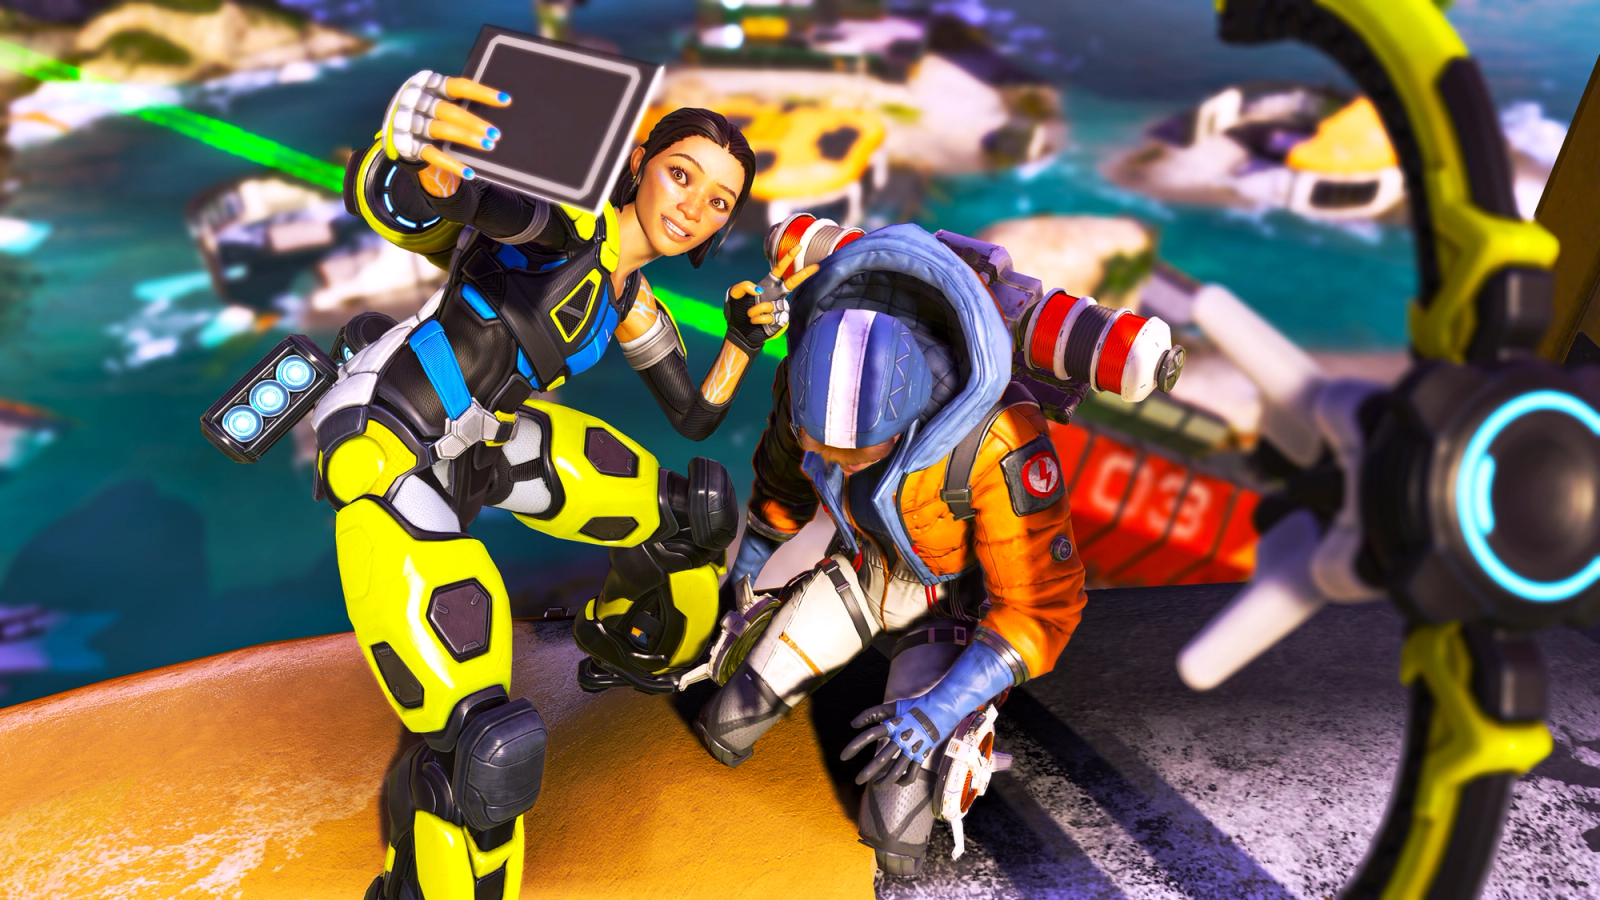 New legend, Conduit, coming in Season 19 of Apex Legends, during her selfie finisher